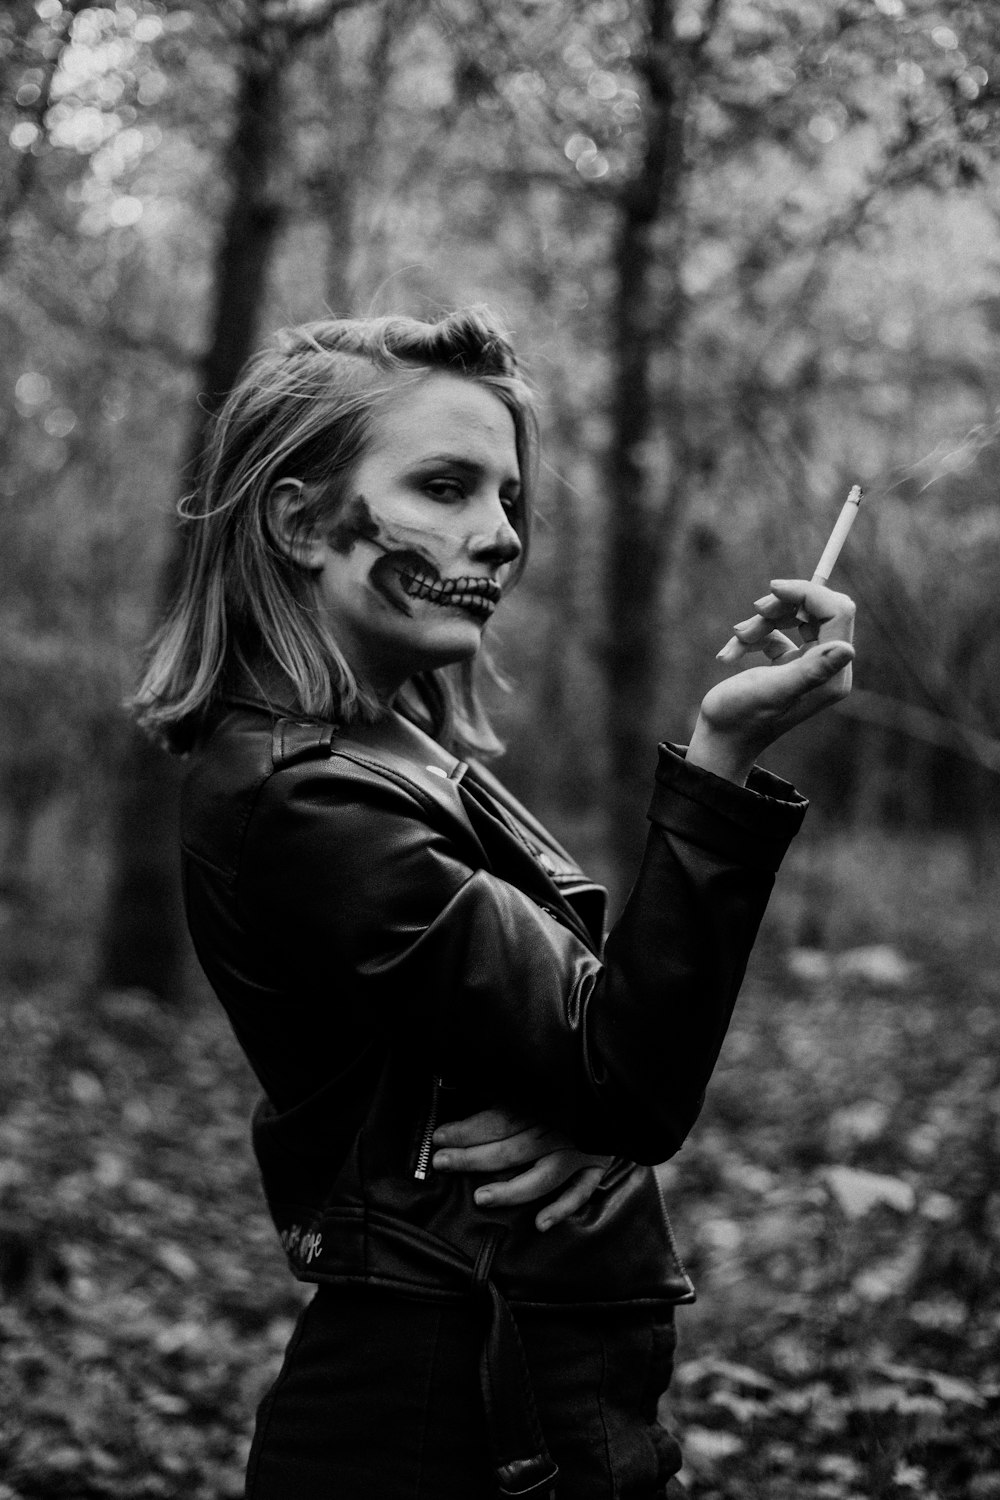 grayscale photo of woman in black leather jacket holding cigarette stick